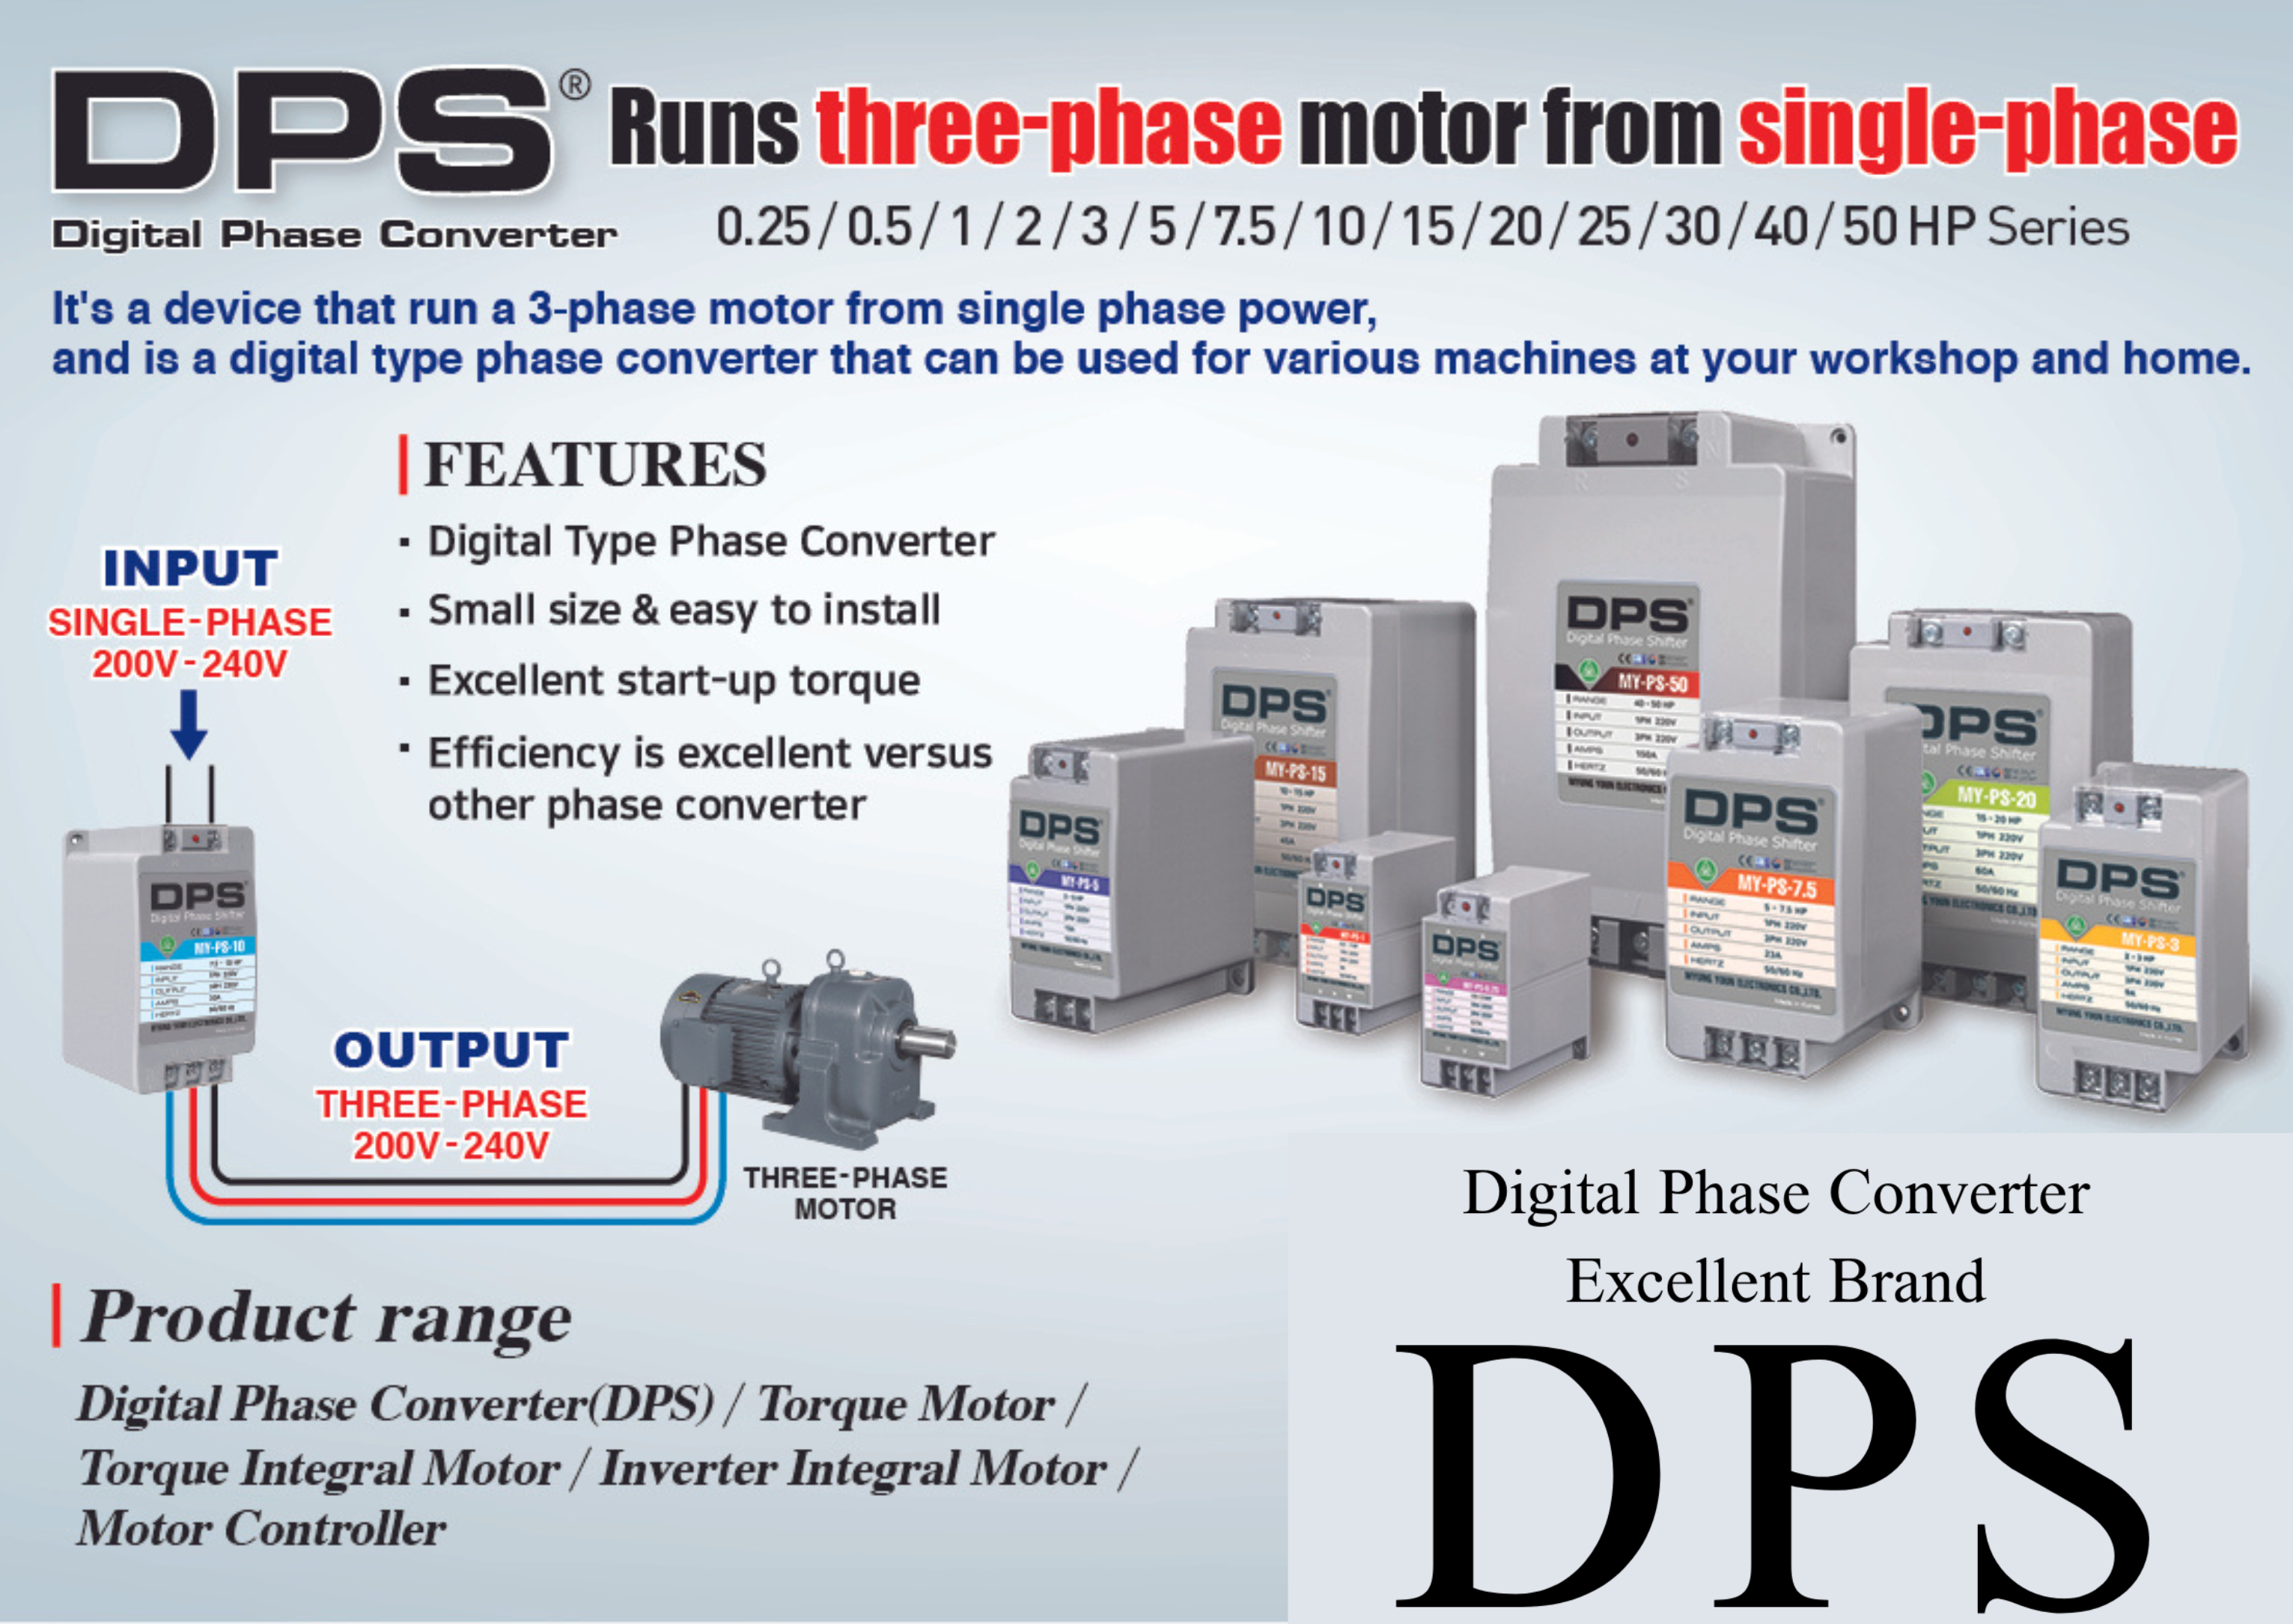 Single to Phase Converter, MY-PS-1 Model, Suitable for 200-240V  0.5HP(0.4kW) 1.5Amps Phase Motor, One DPS Must Be Used for One Motor Only,  Input/Output 200V-240V, Digital Type